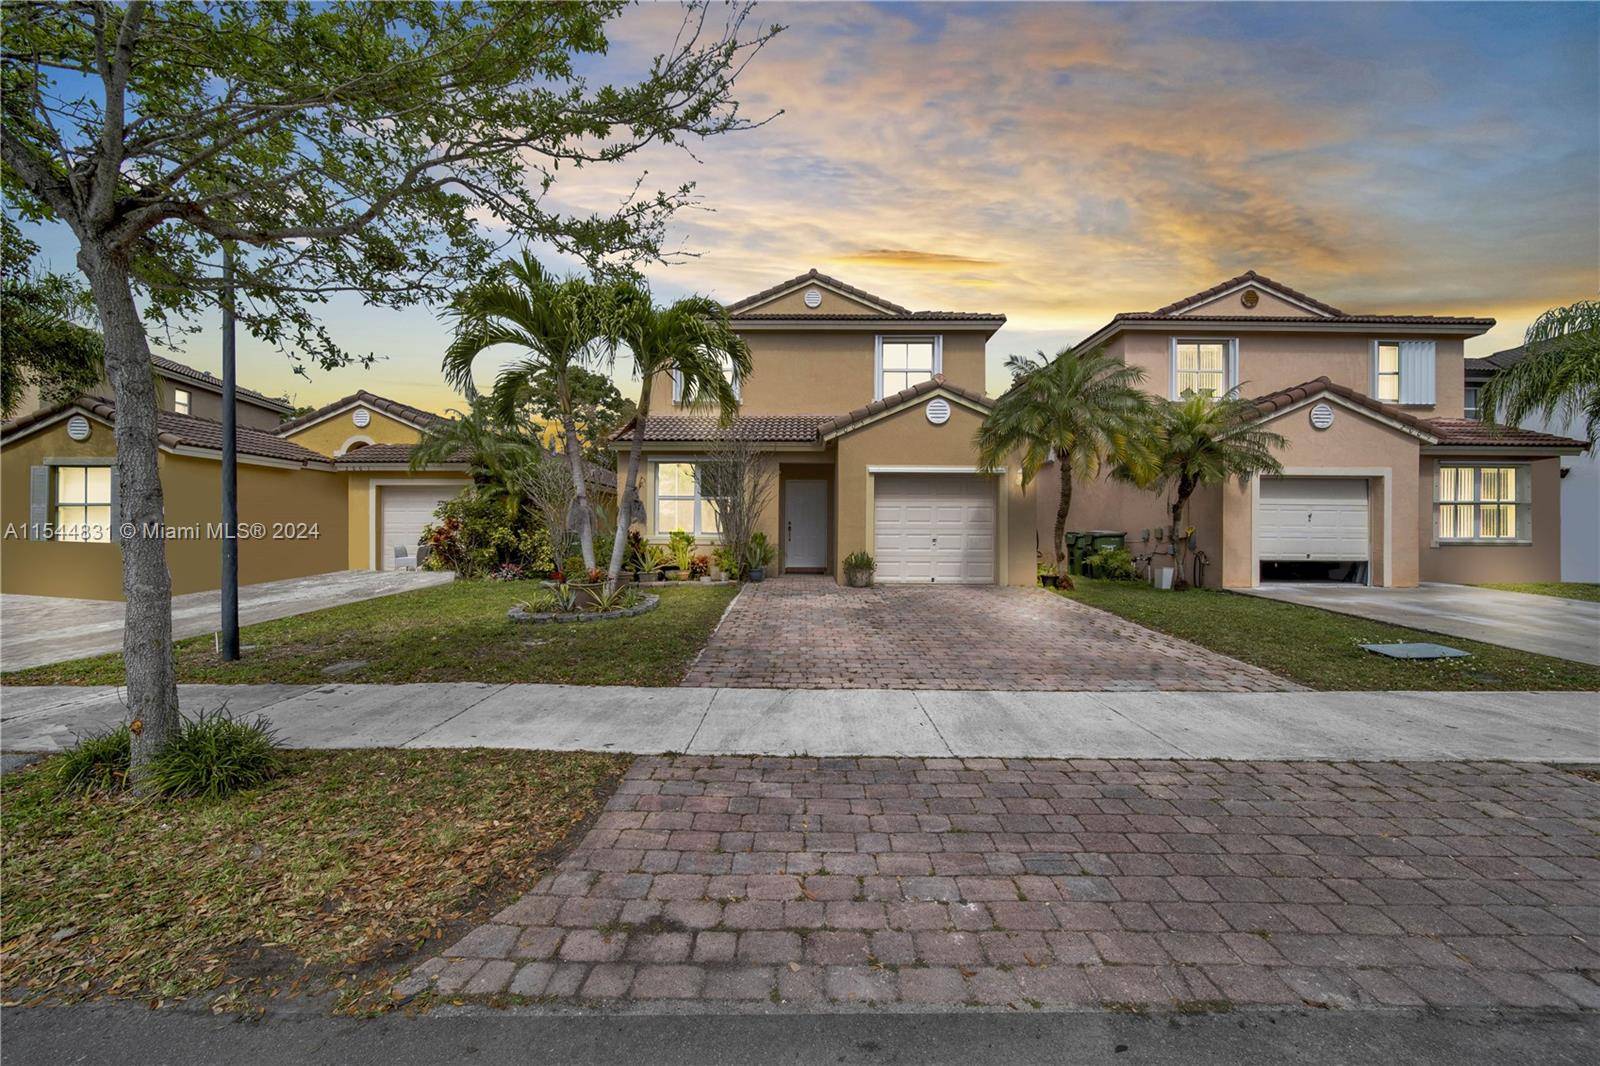 Introducing a delightful property located at 2005 SE 15th St Homestead, FL 33035.